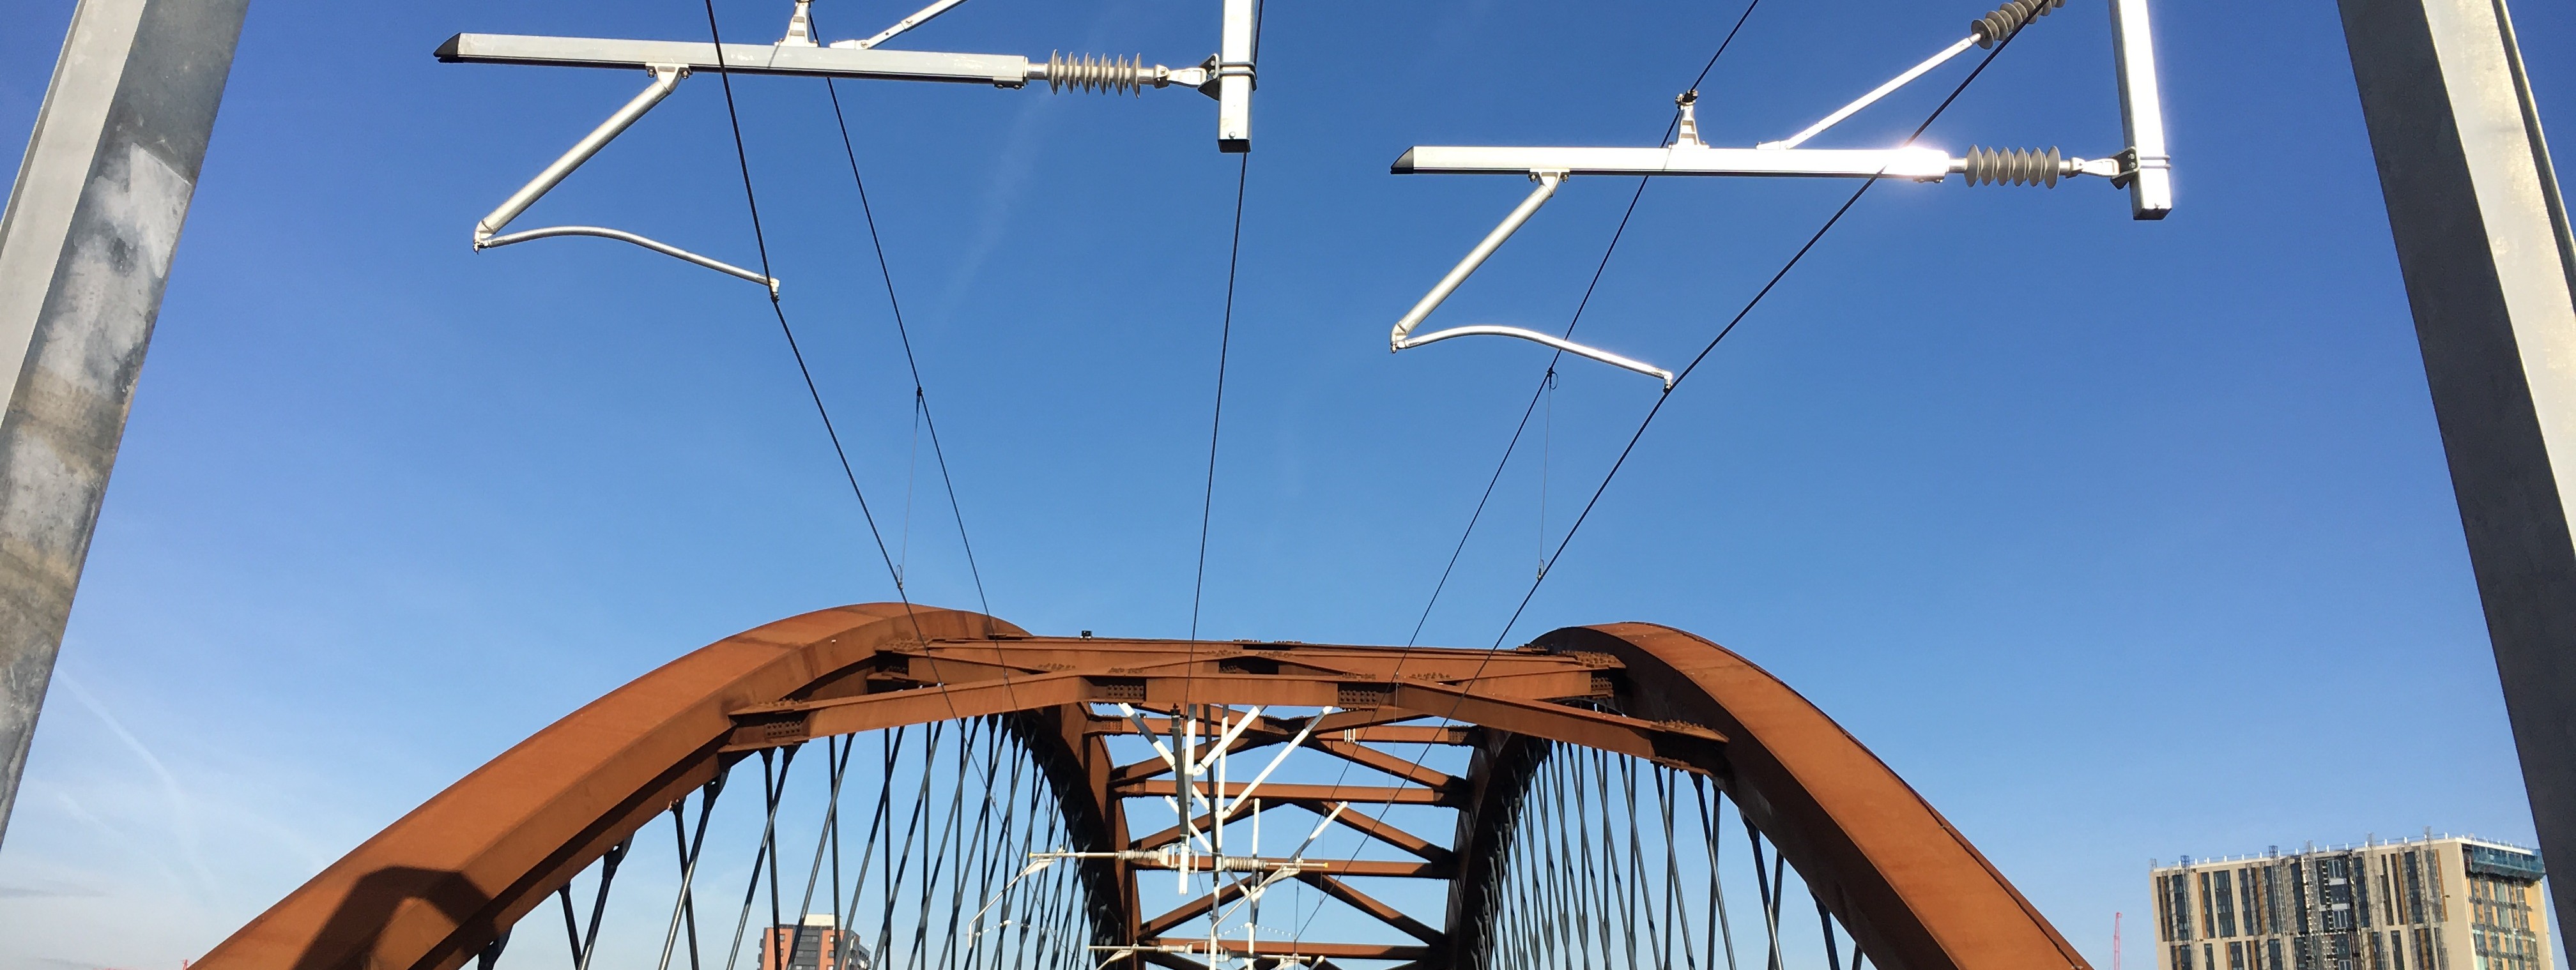 ordsall-chord-completion